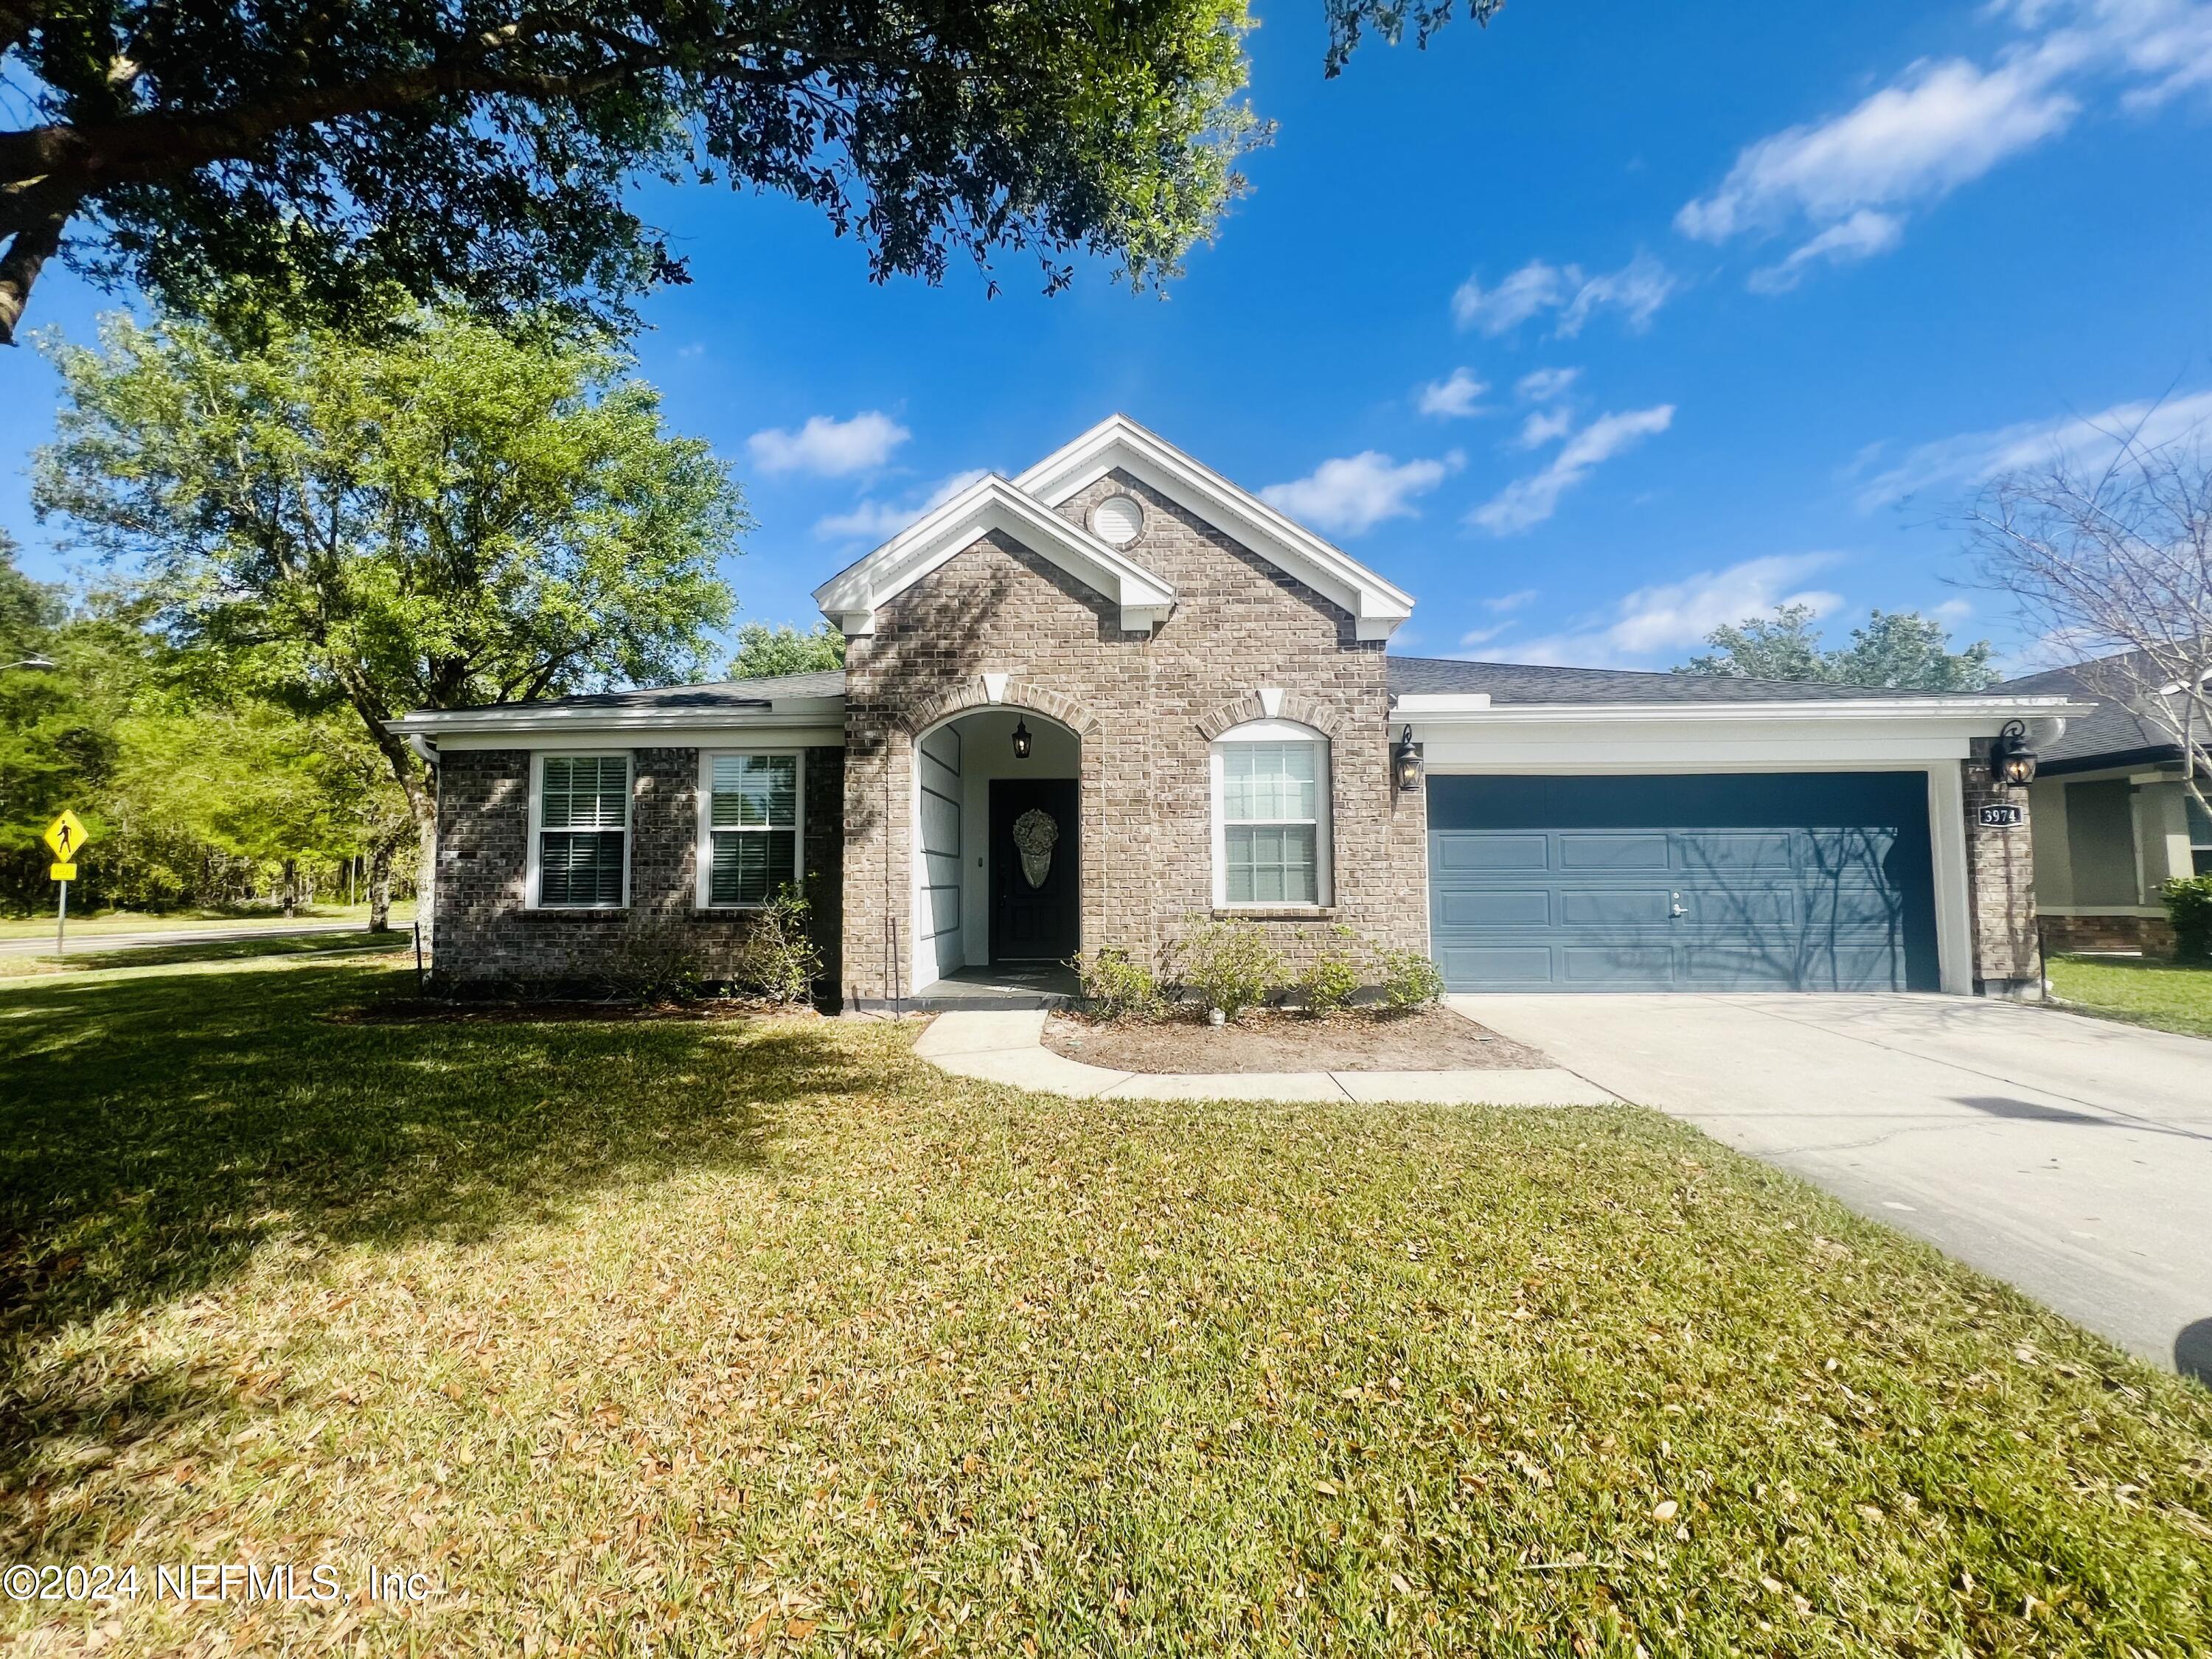 Middleburg, FL home for sale located at 3974 WHITE PELICAN Way, Middleburg, FL 32068